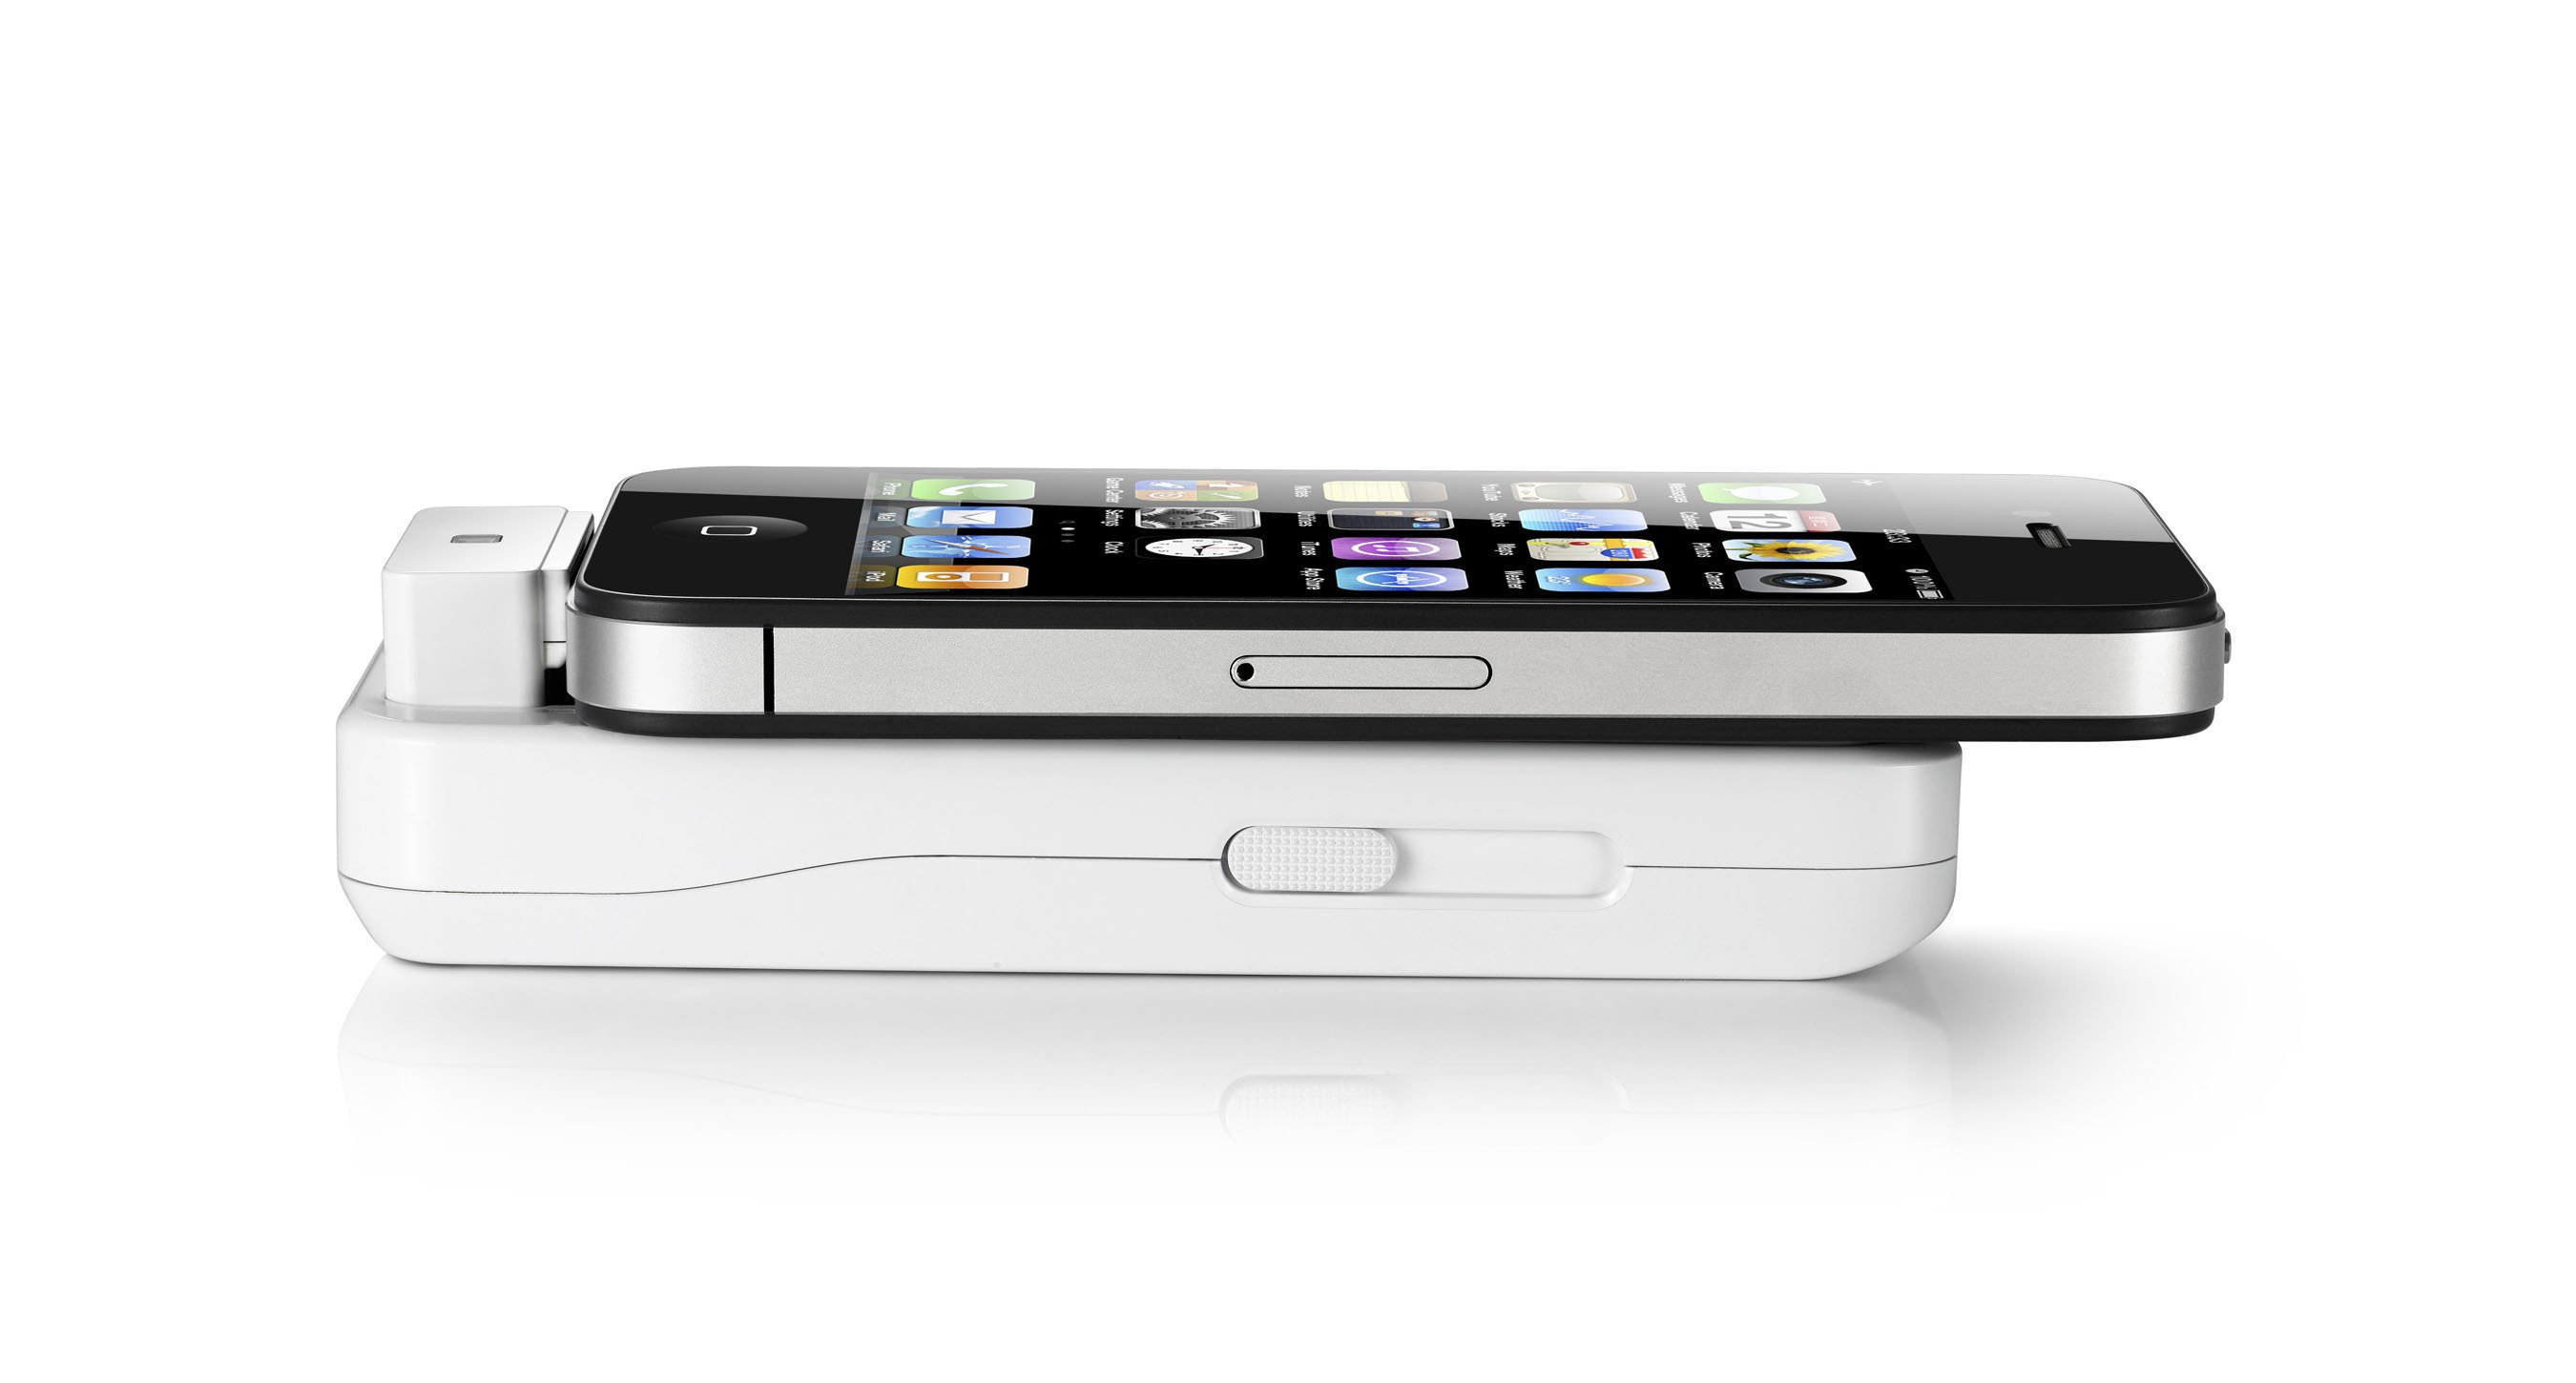 General Imaging set to launch the ipico slide on projector for iPhone and iPod touch